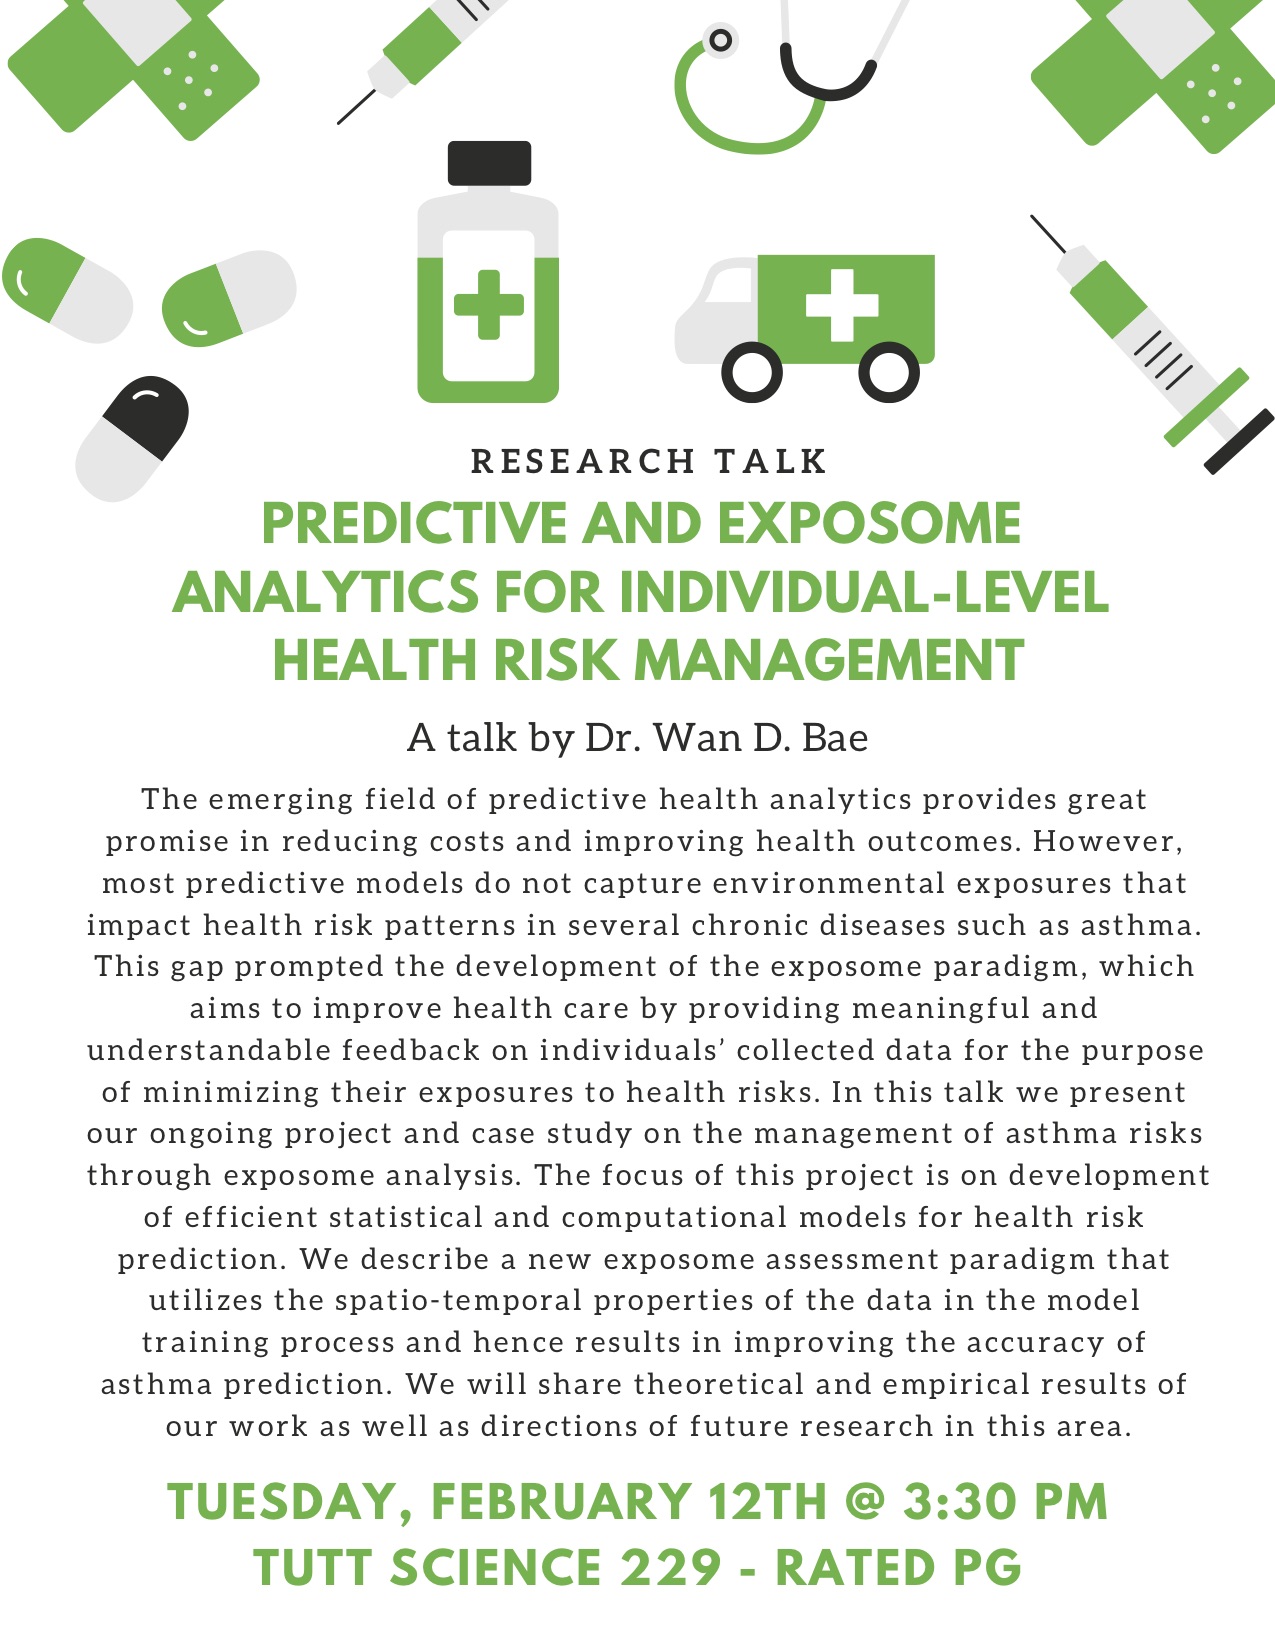 Feb 12 - Predictive and Exposome Analytics for Individual-level Health Risk Management